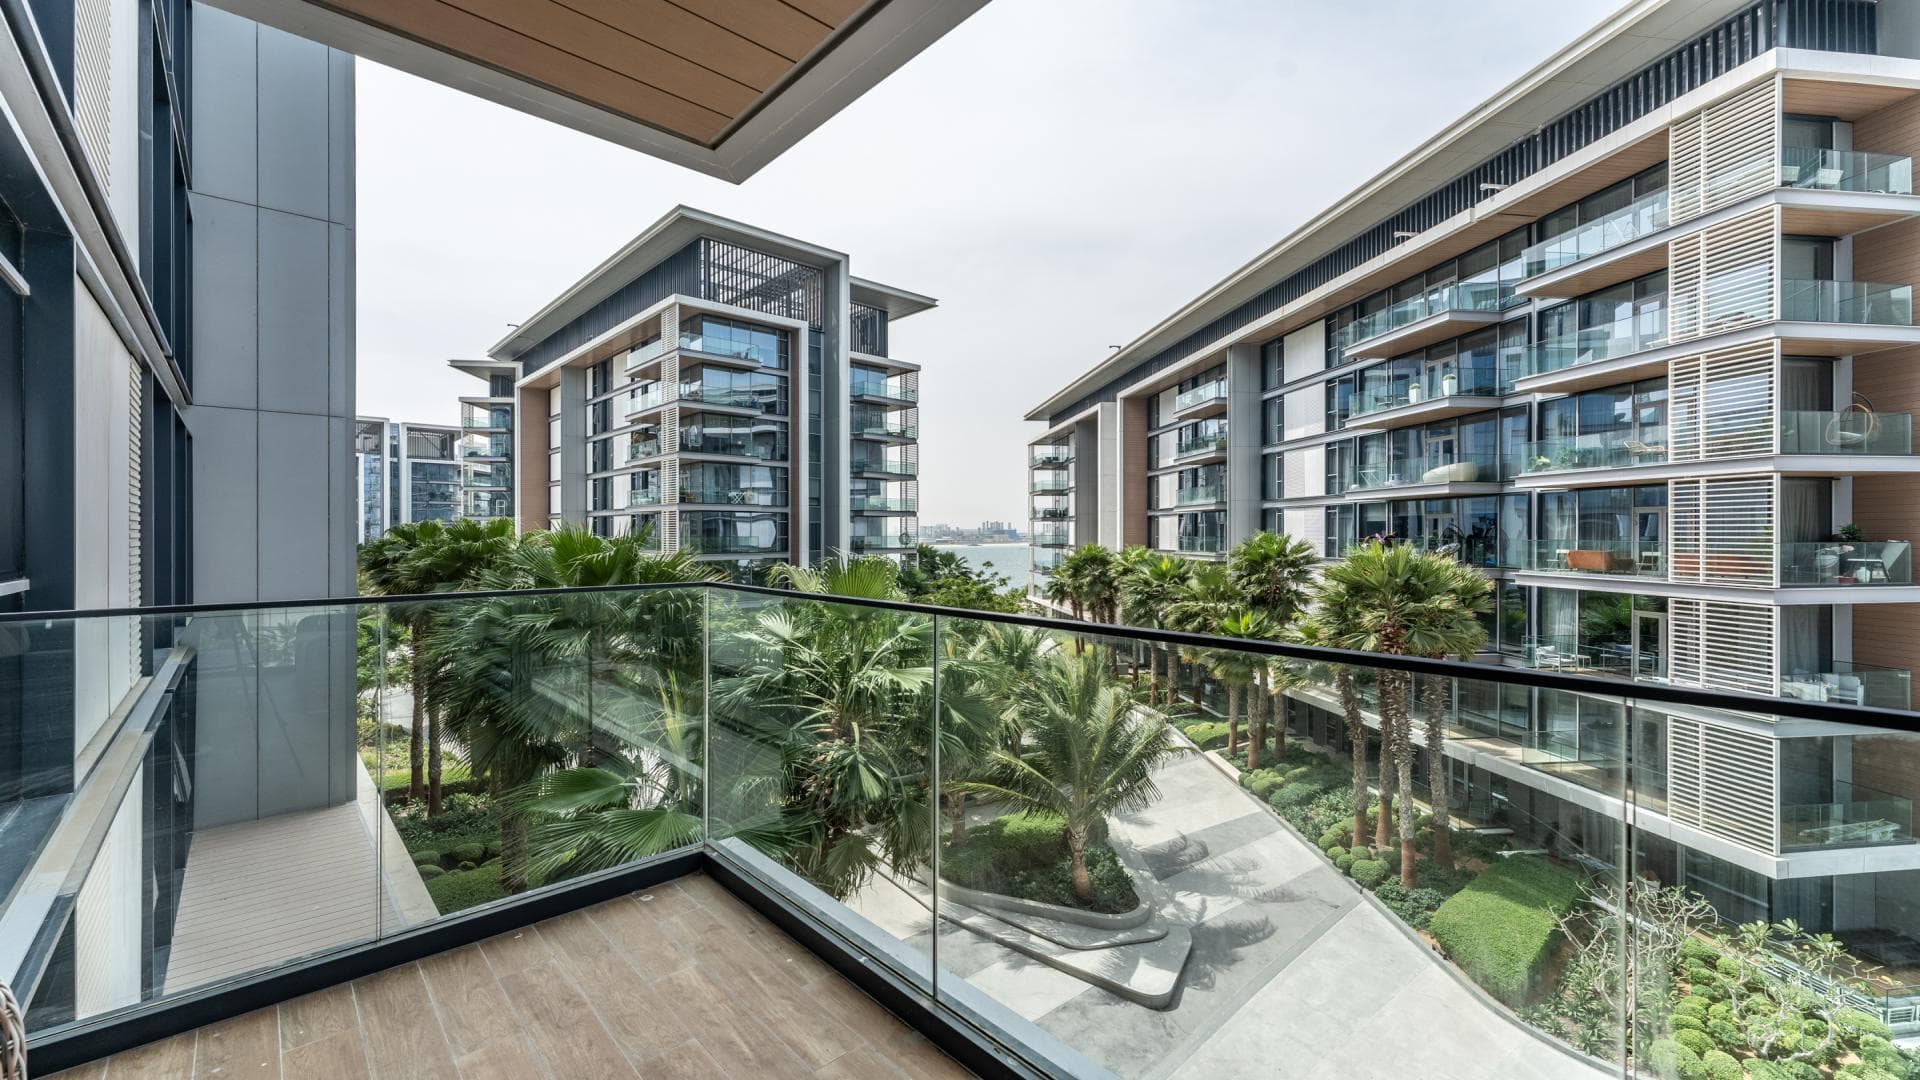 3 Bedroom Apartment For Sale Bluewaters Residences Lp20445 16a9fe9cc8769500.jpg